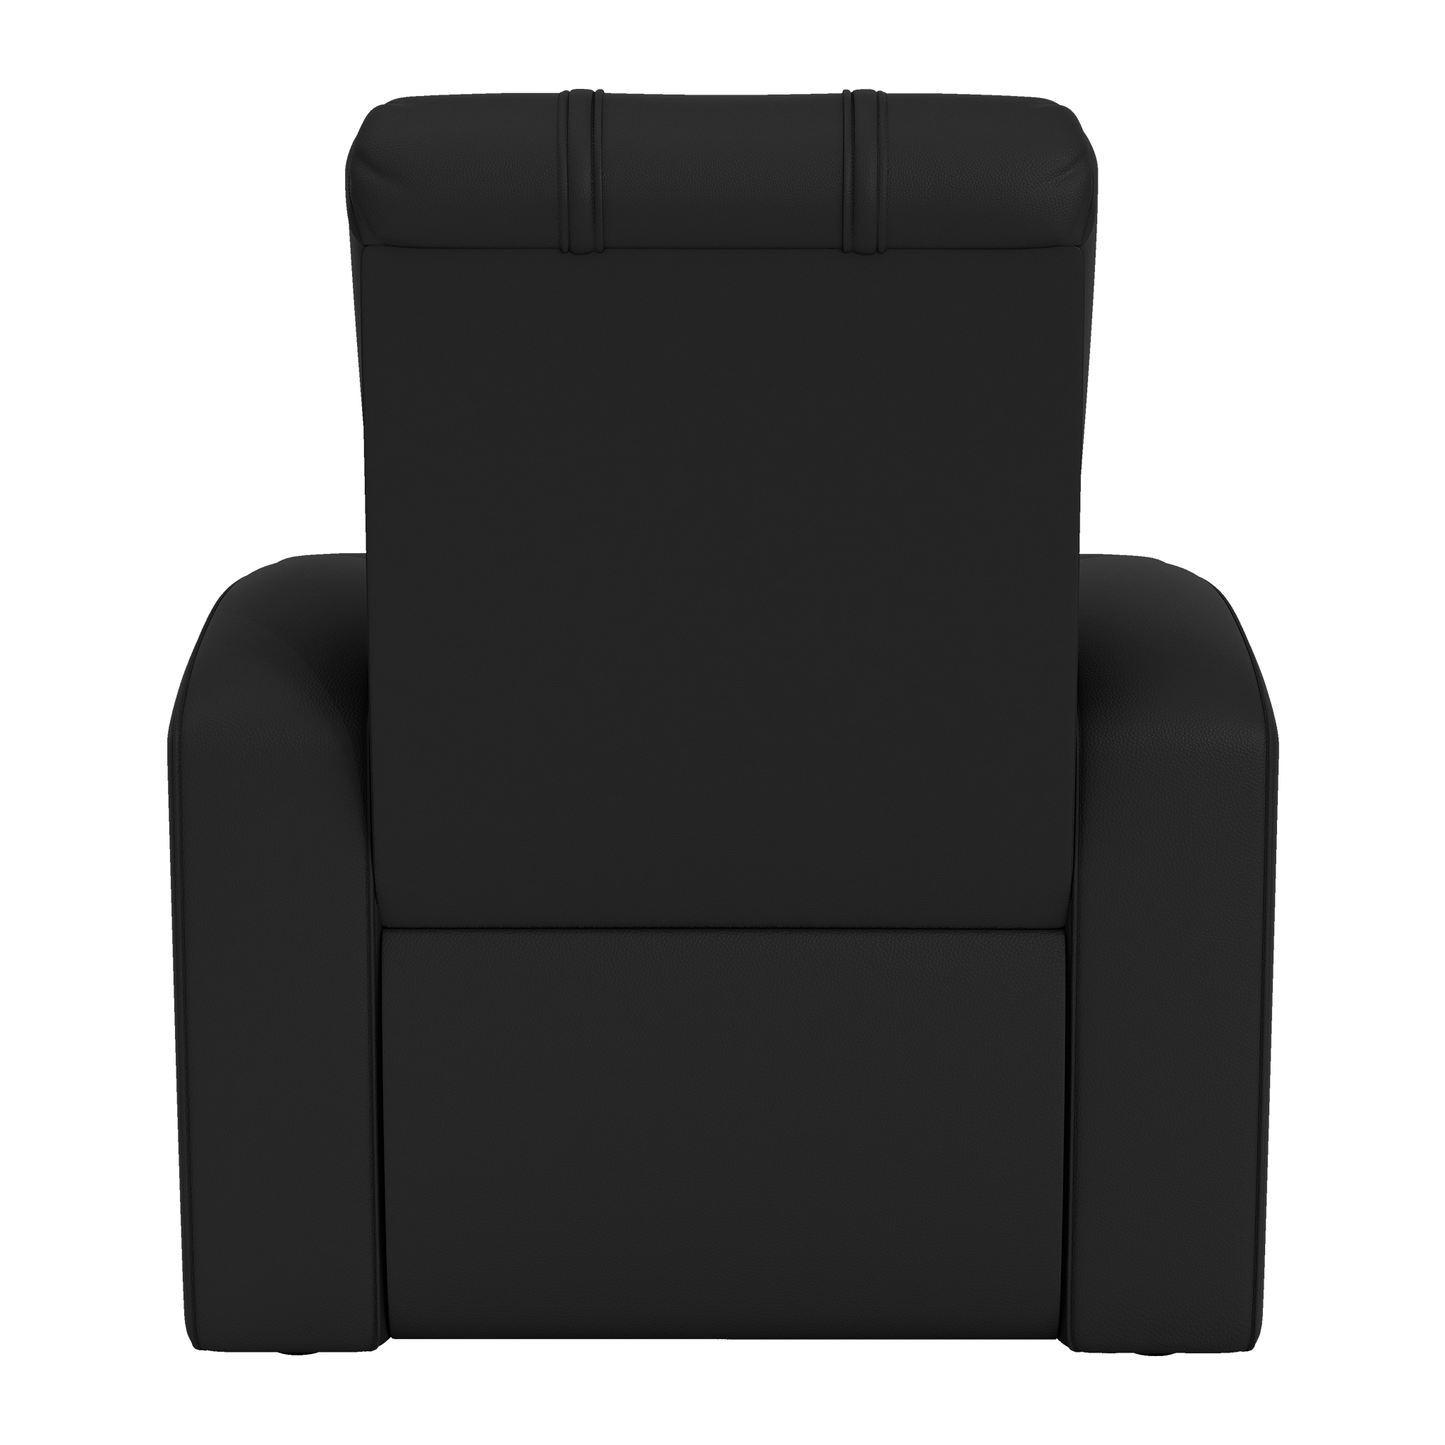 Relax Home Theater Recliner with Oakland Athletics Cooperstown